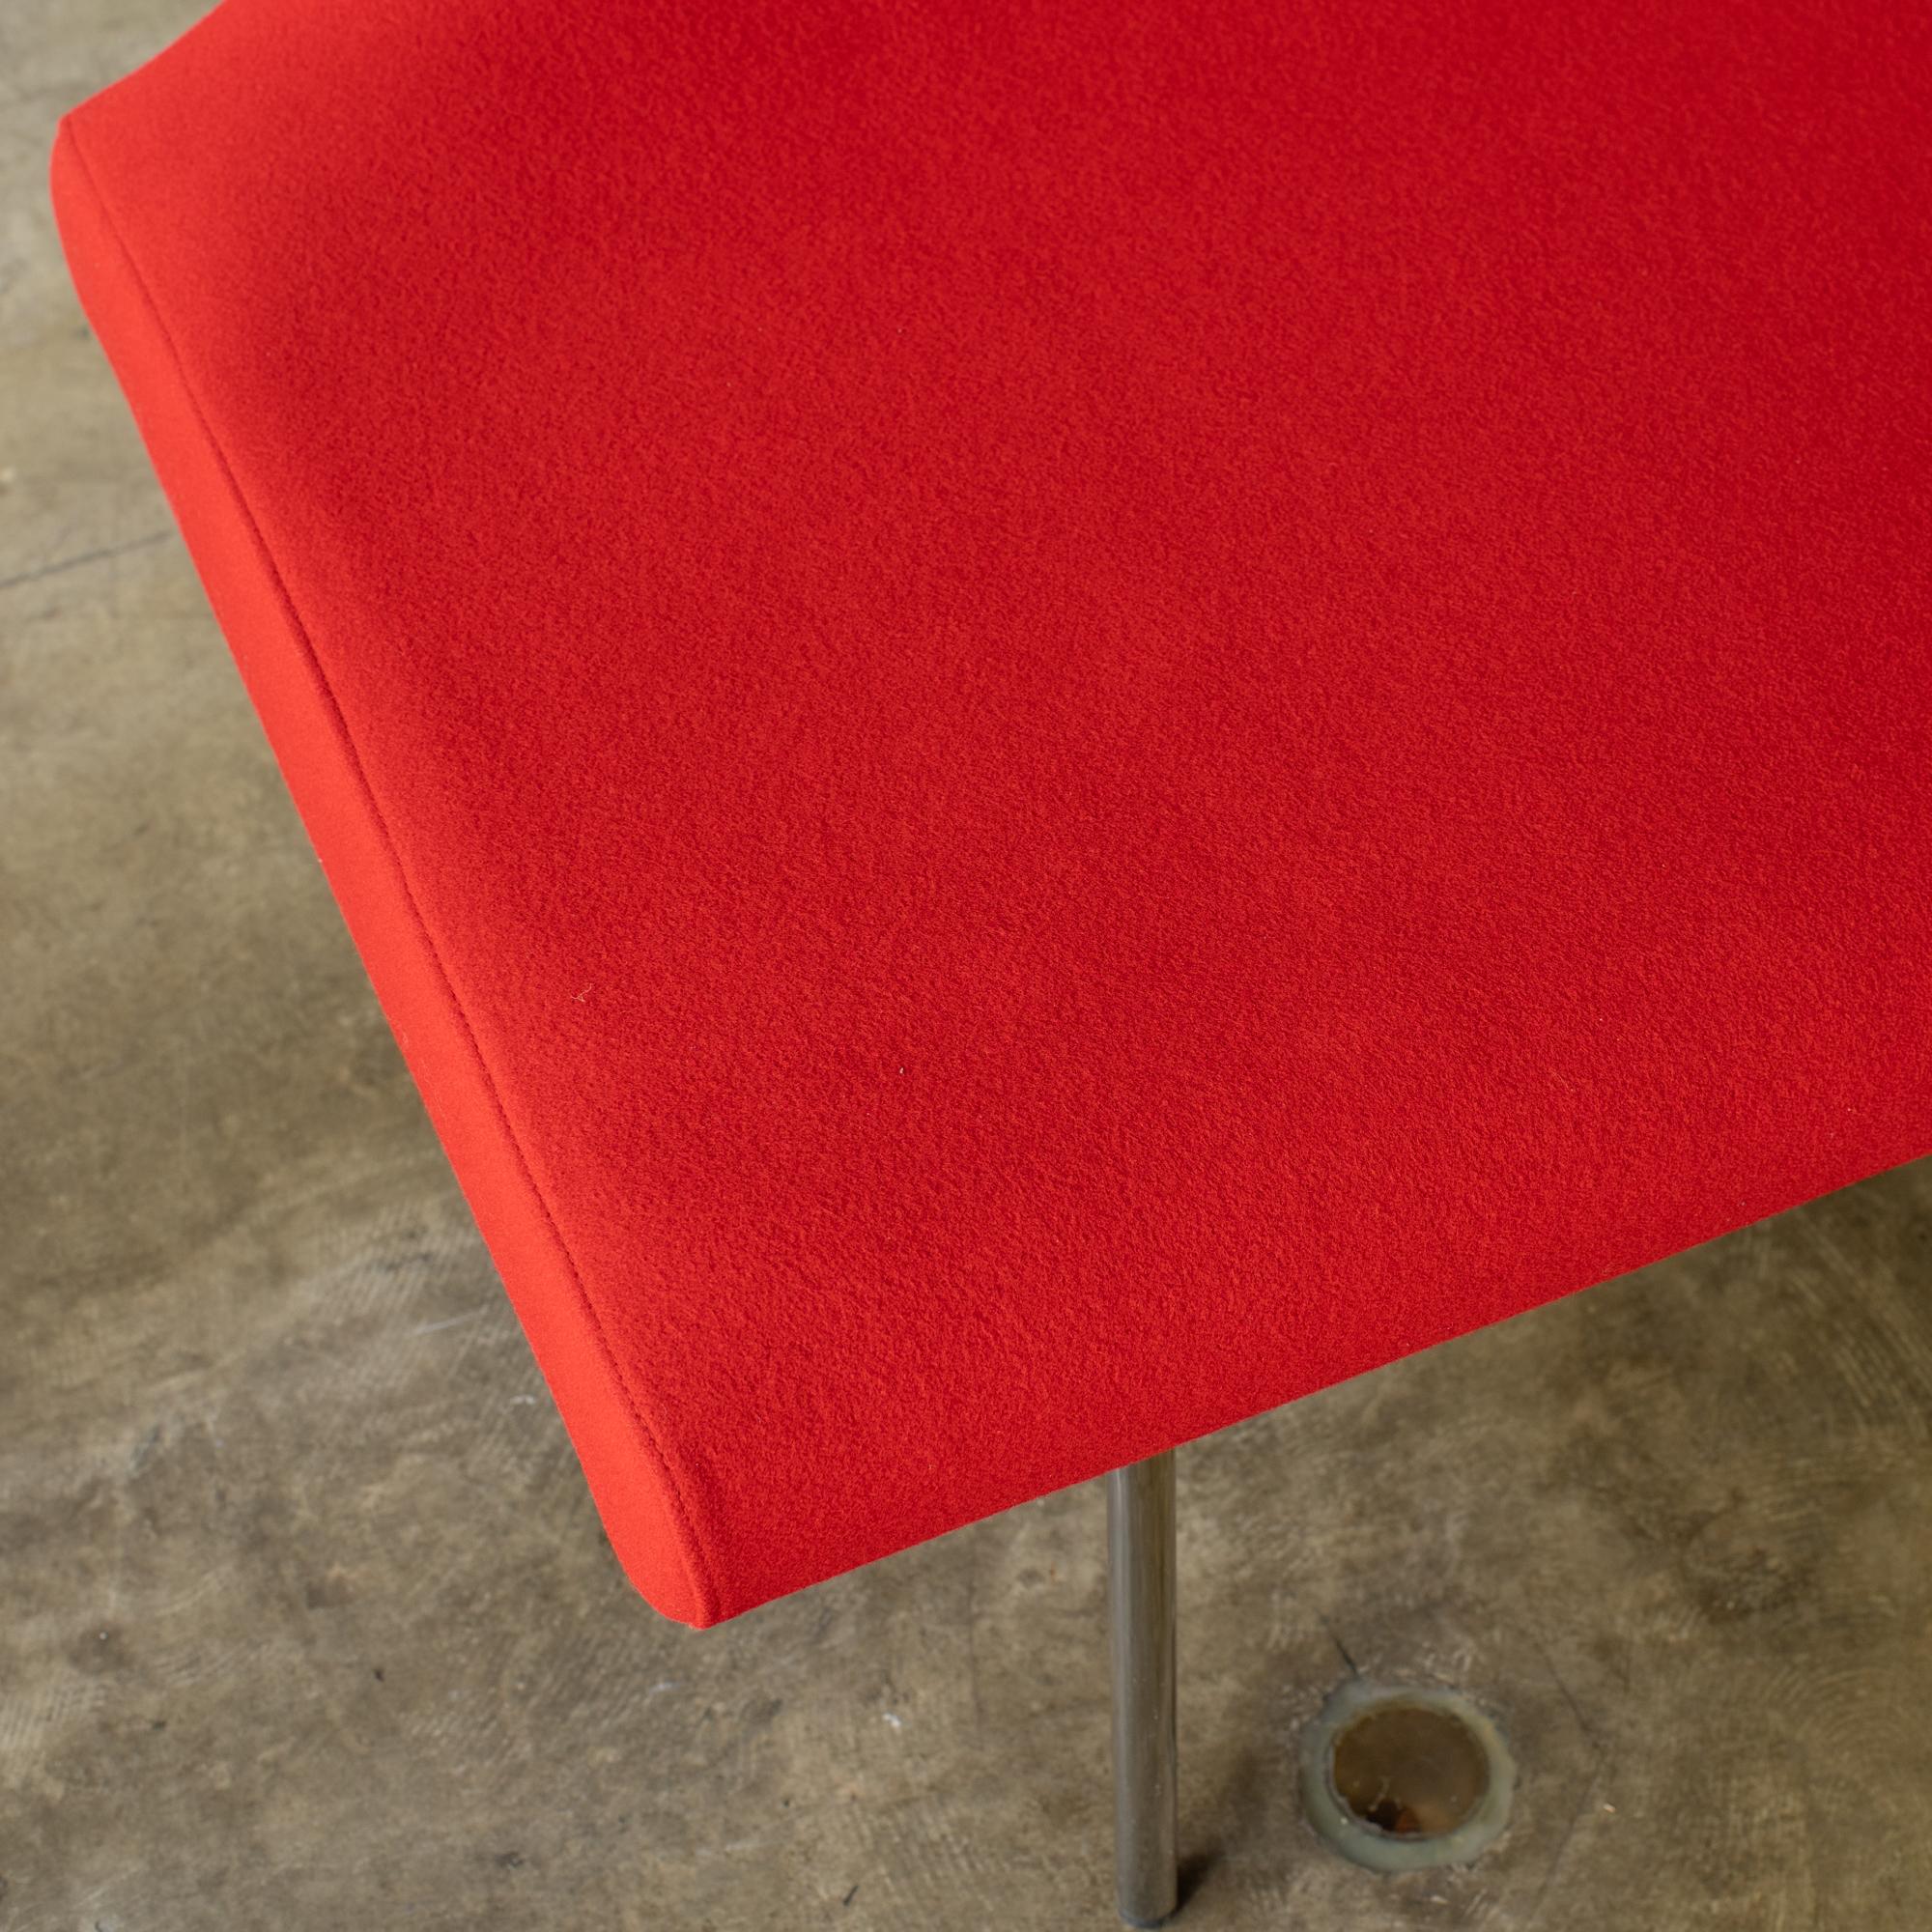 Chair red fabric Orbit sofa Eero Koivisto  Y2K style design space age For Sale 2